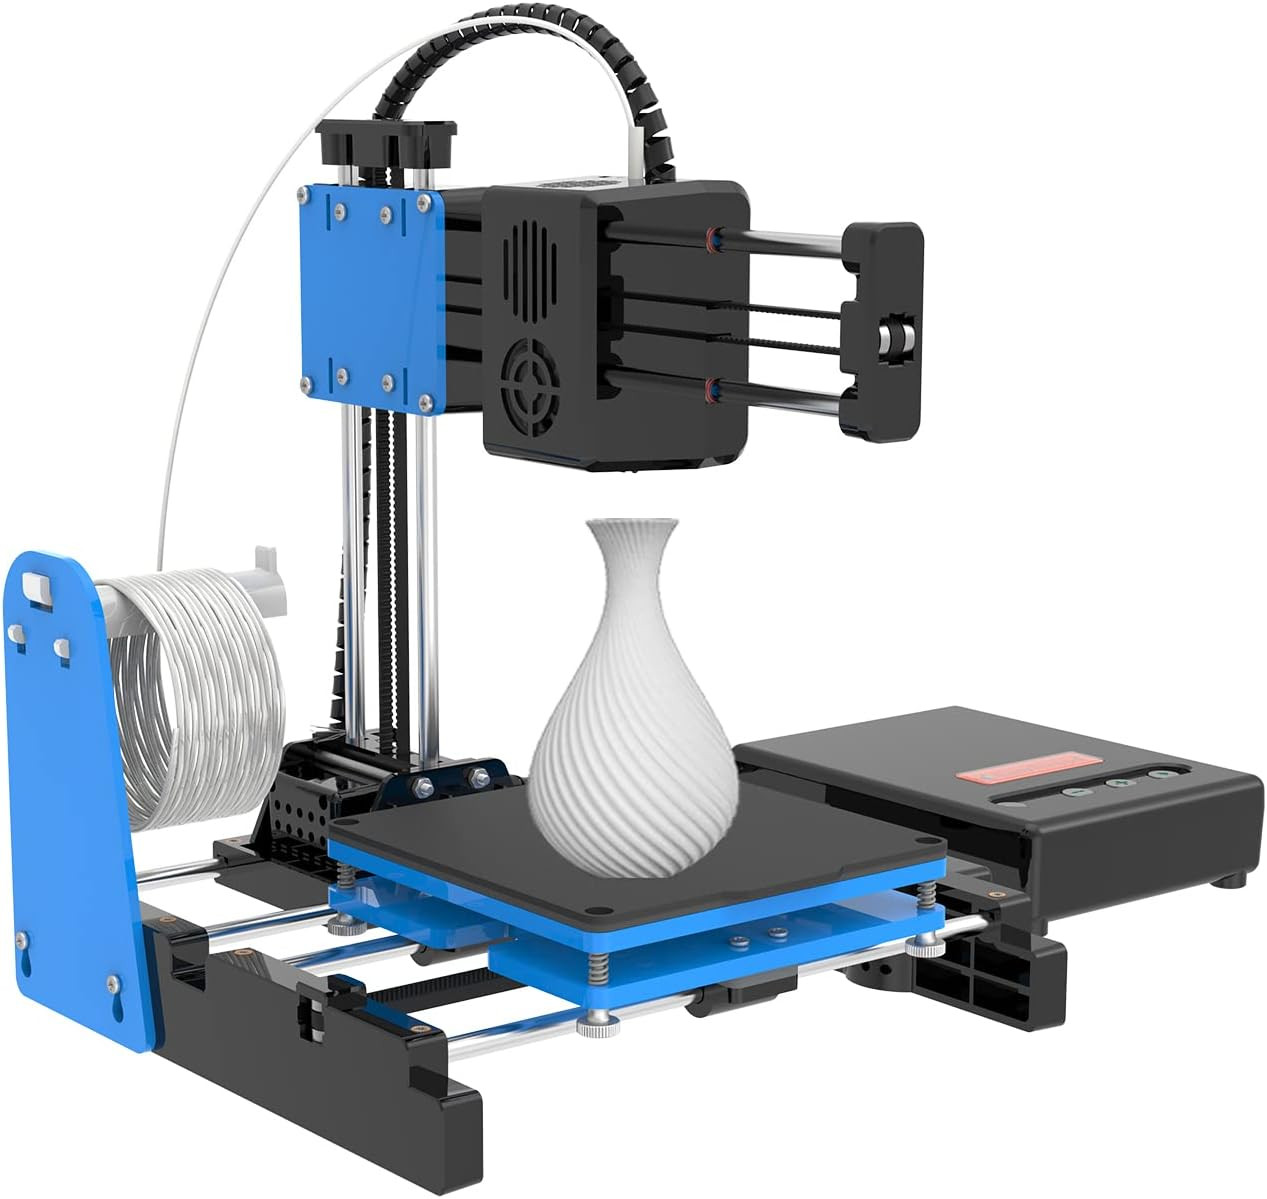 See more about 3D Printers